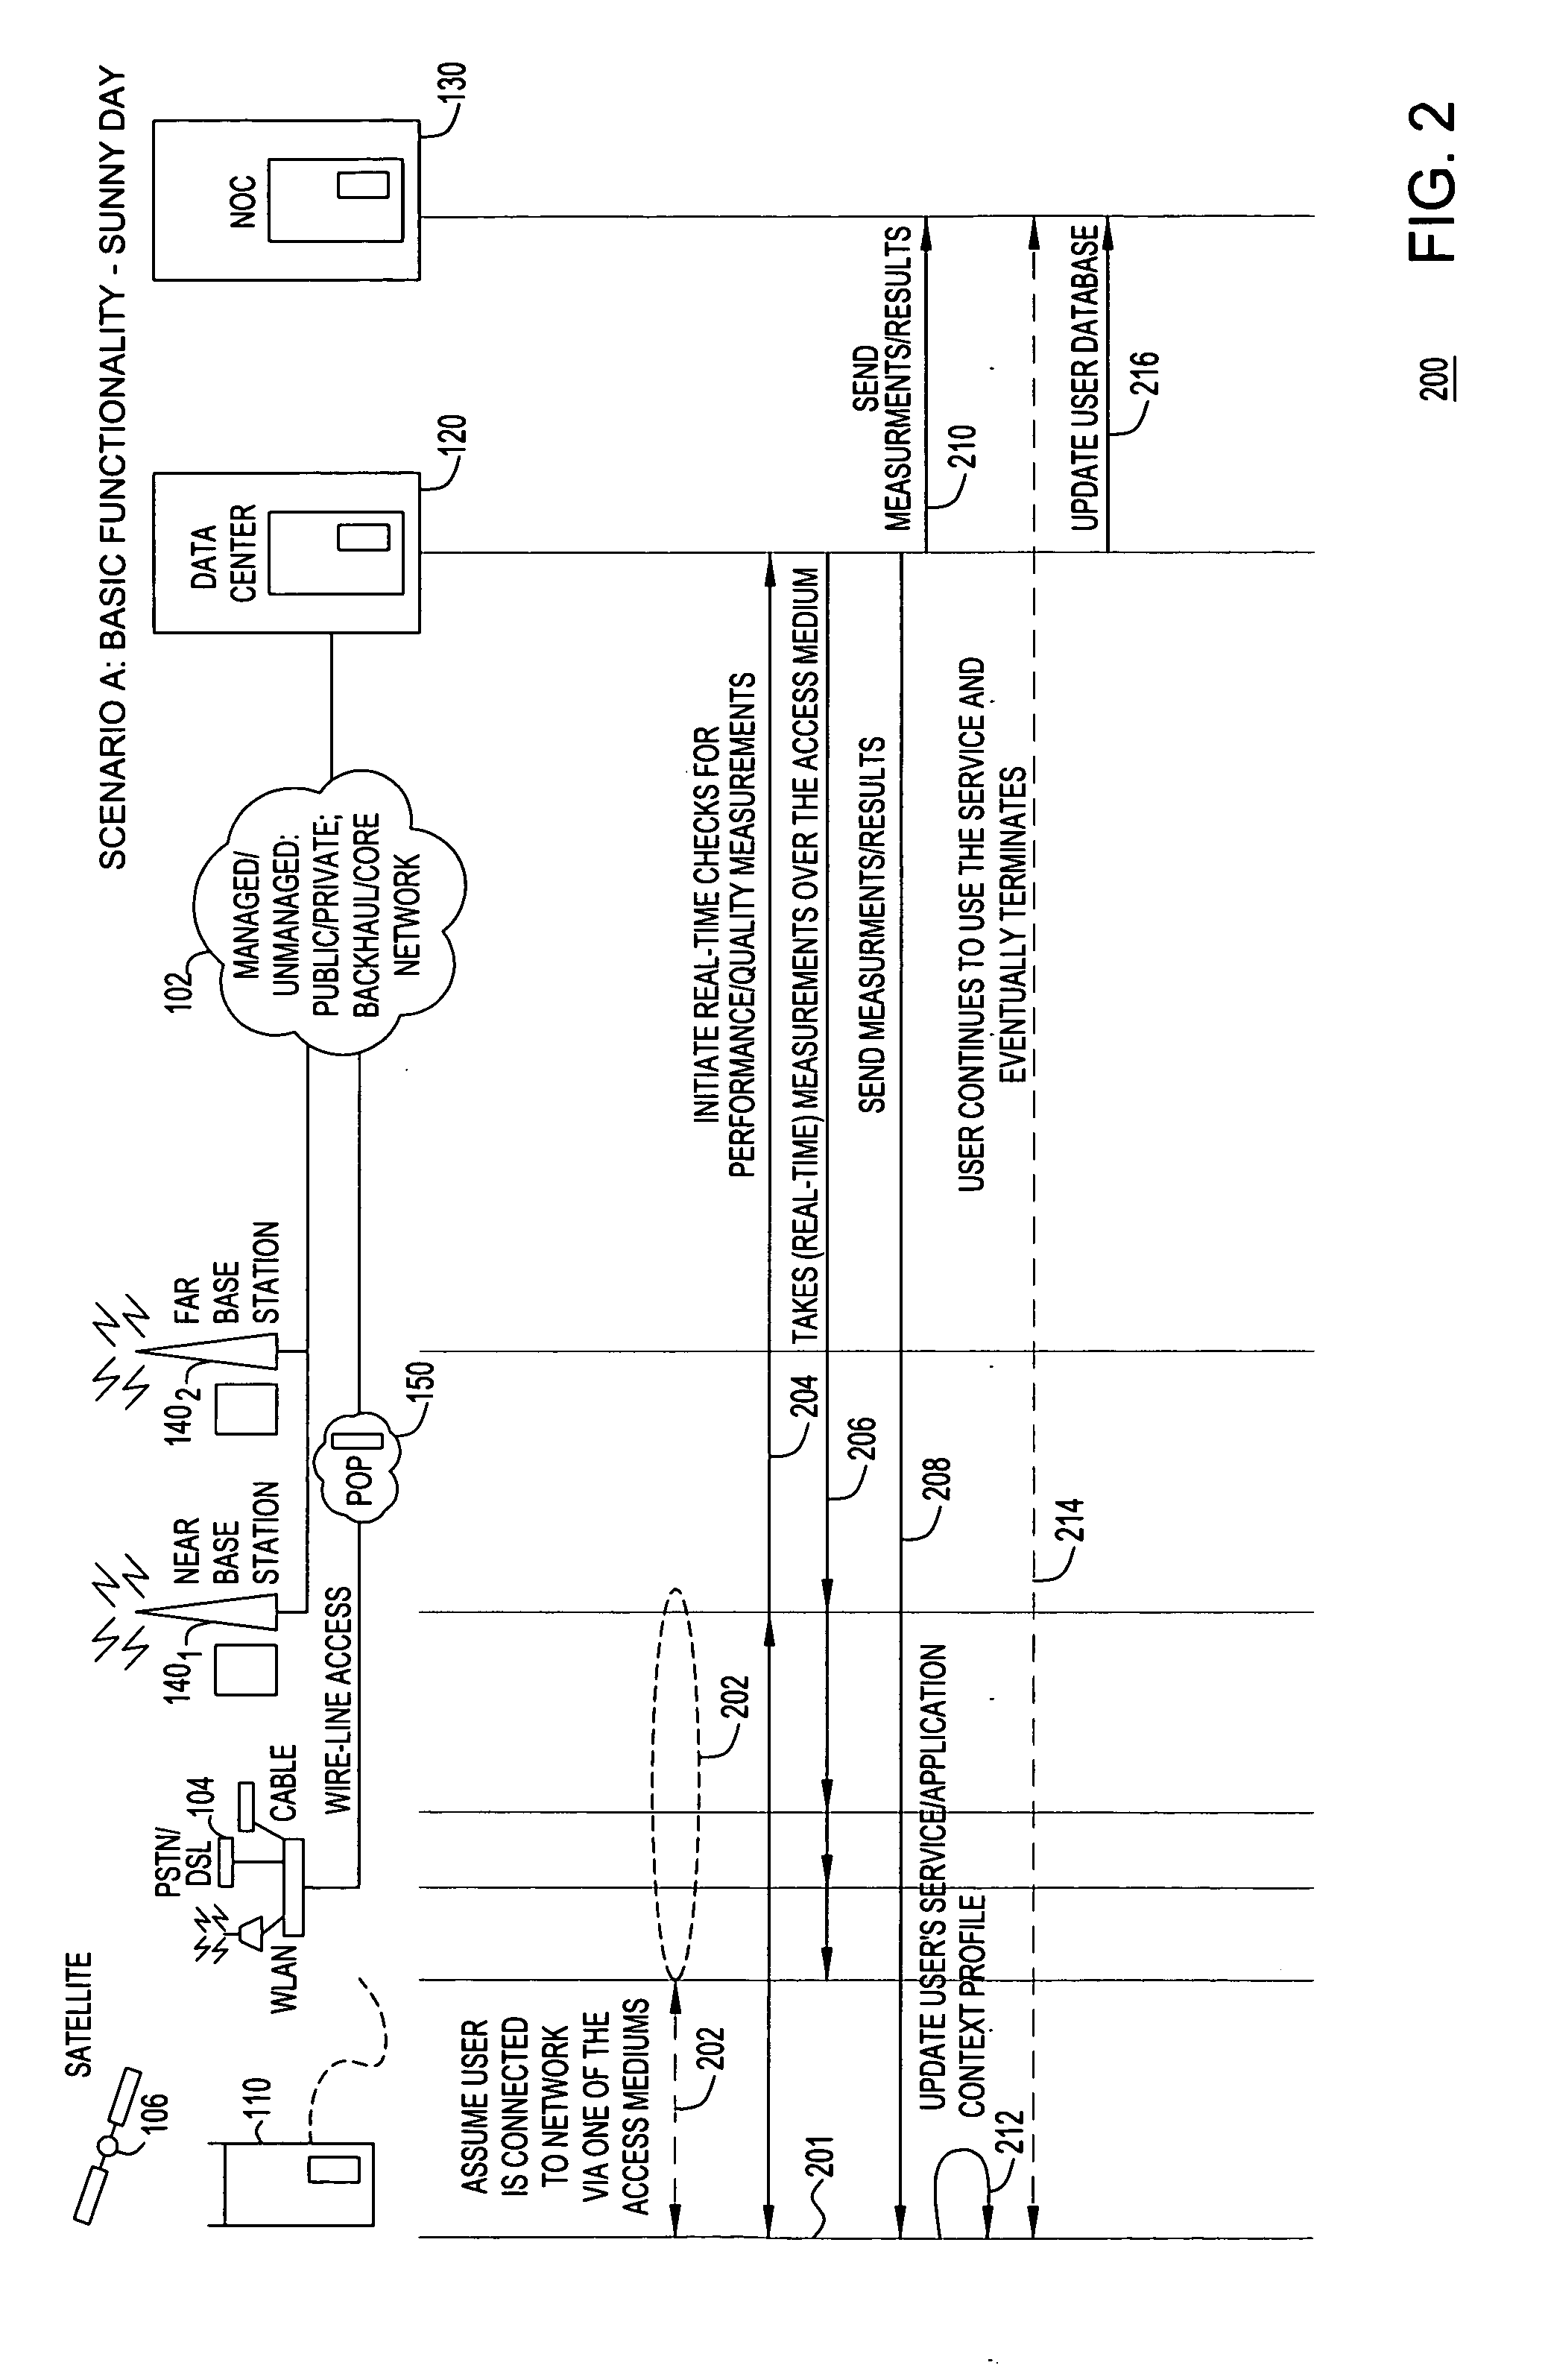 Method and apparatus for providing end-to-end high quality services based on performance characterizations of network conditions